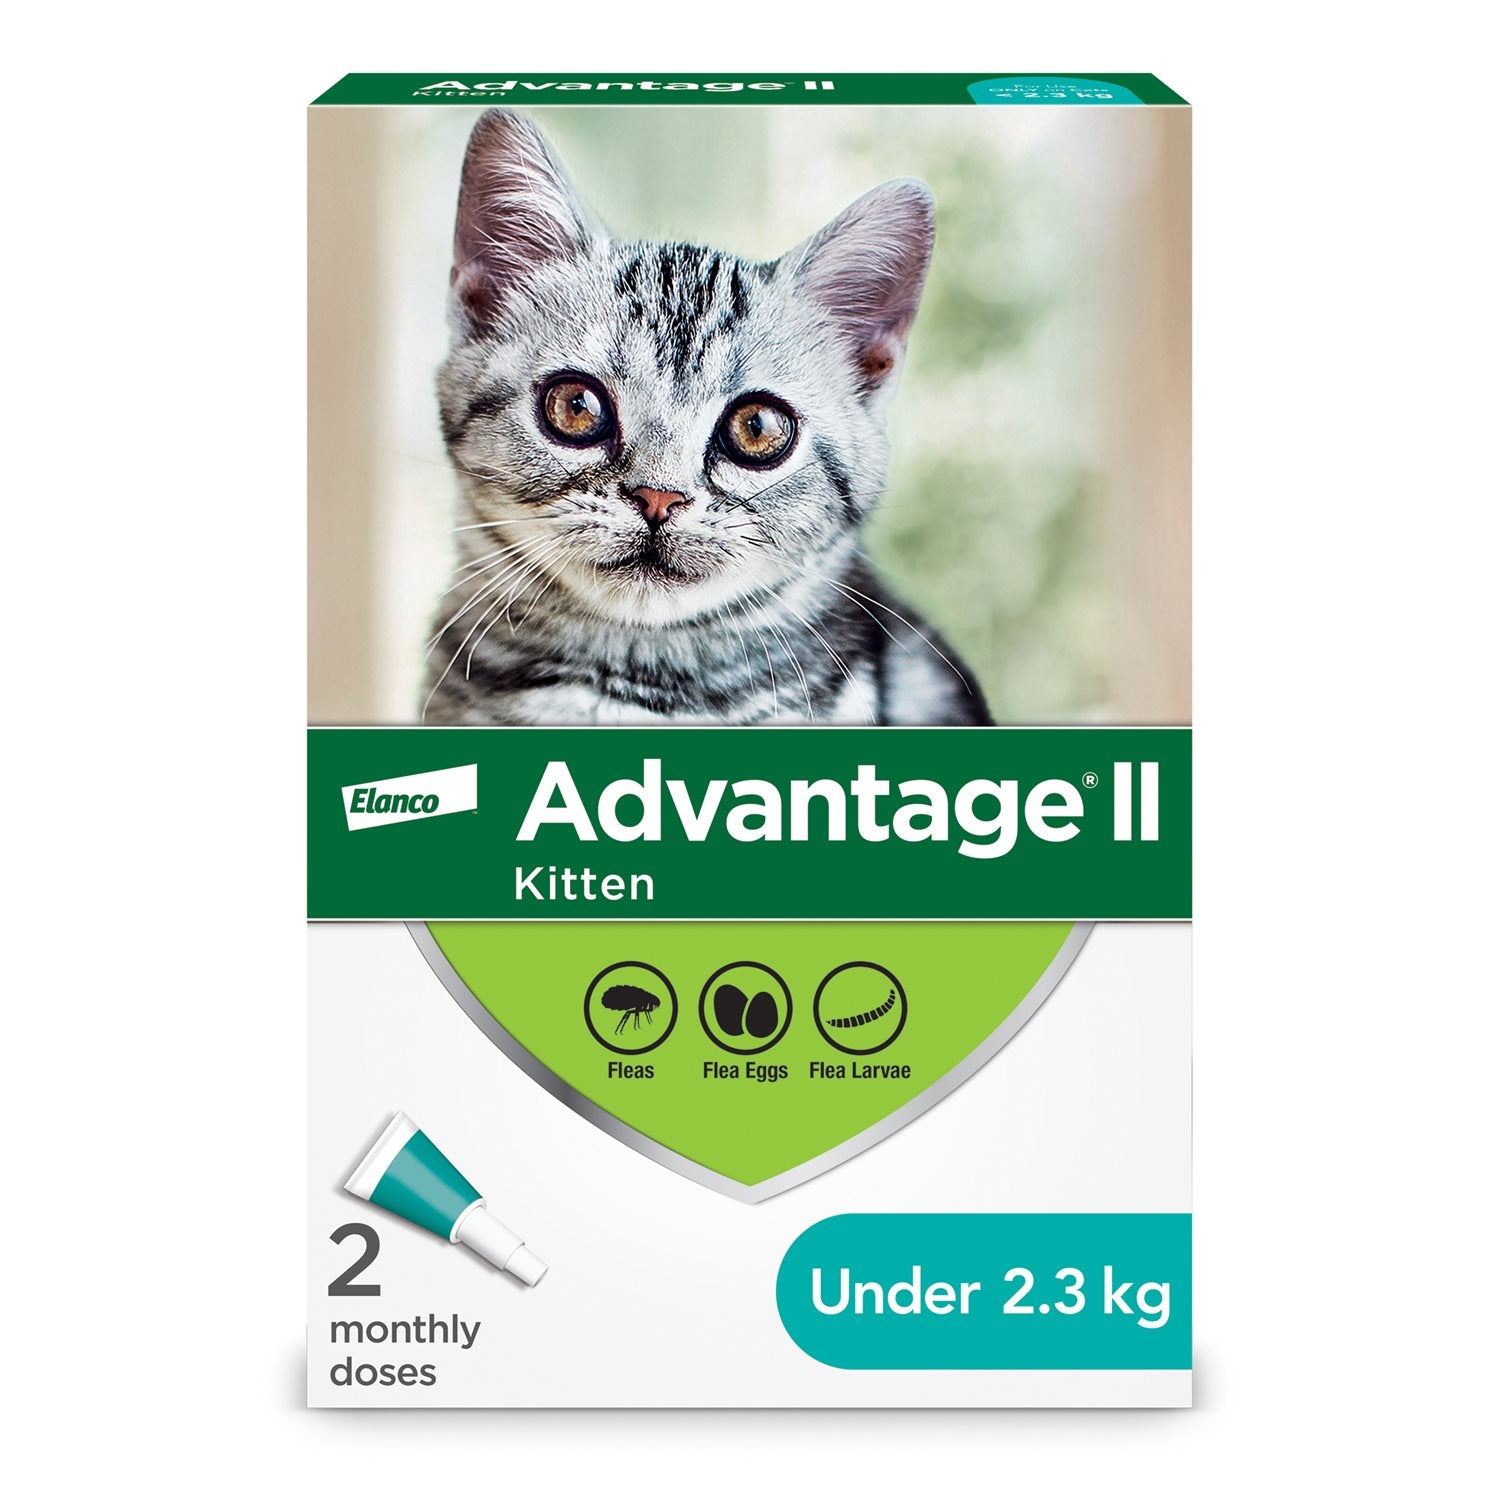 Advantage II for Kitten (less than 2.3 kg) 2 doses